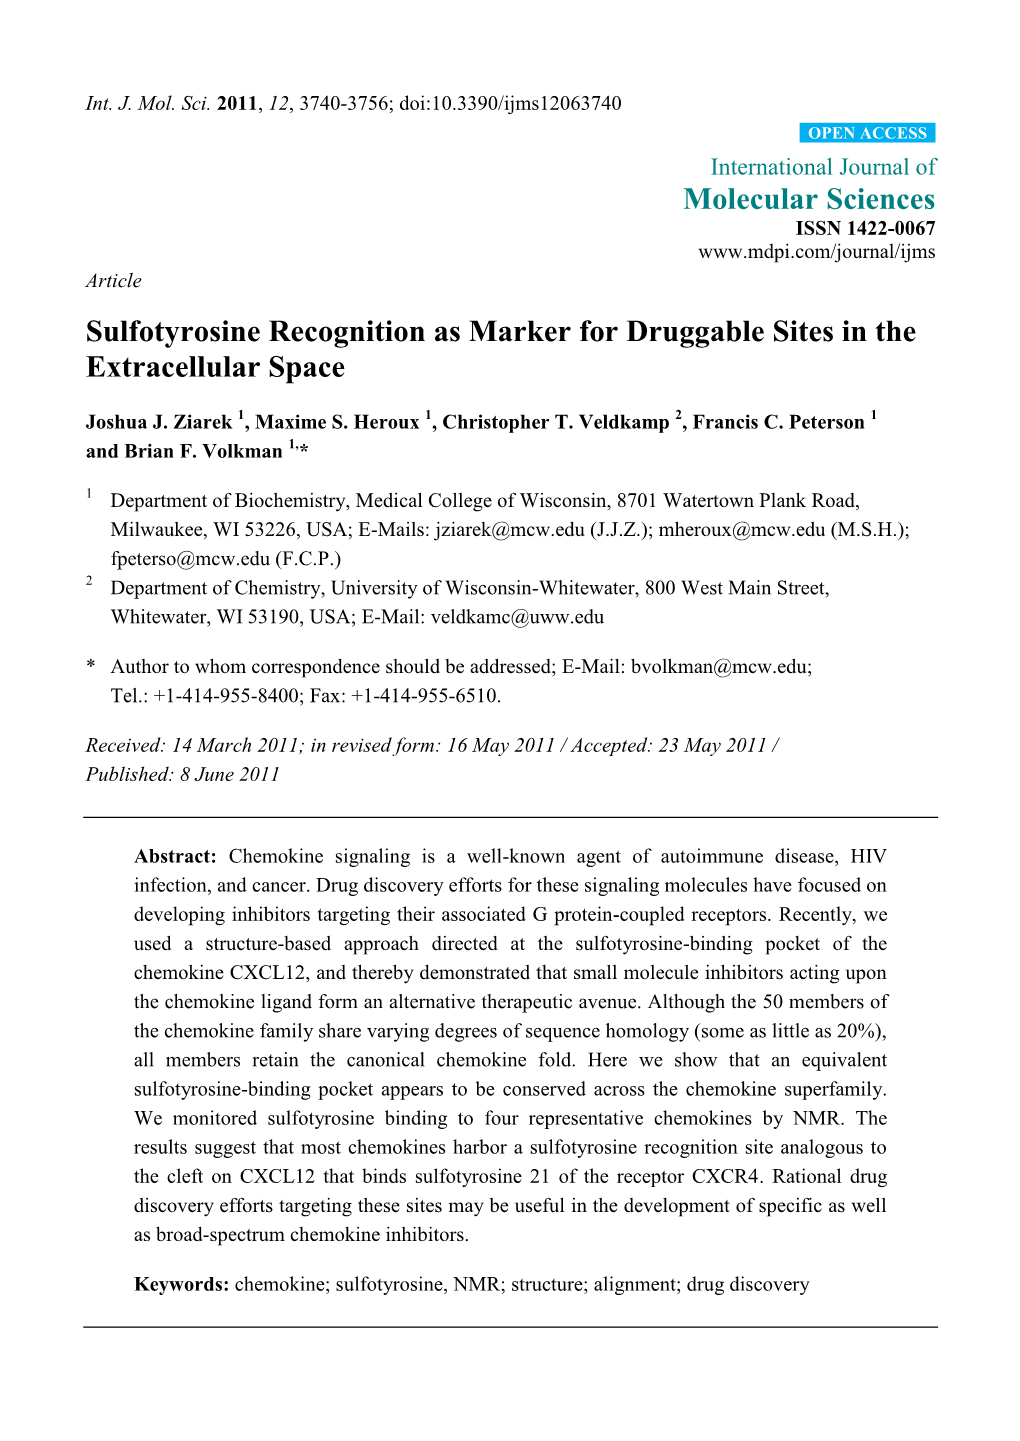 Sulfotyrosine Recognition As Marker for Druggable Sites in the Extracellular Space